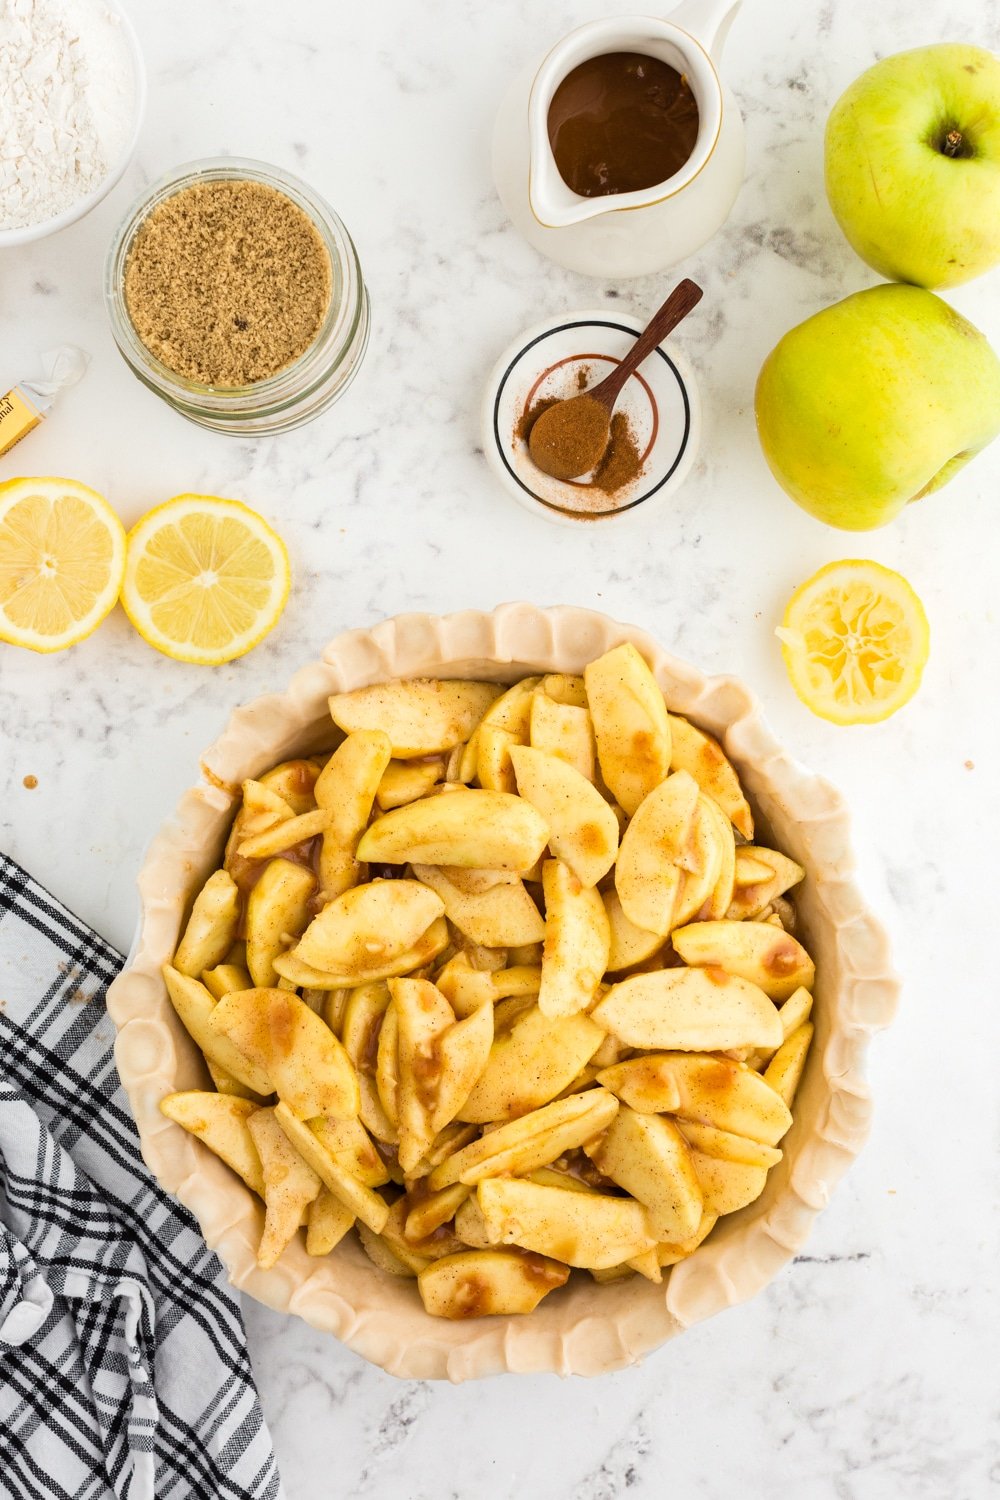 Apple pie mixture coated in caramel sauce added to a prepared pie dish with pie crust, black and white checkered linen, whole green apples, sliced lemons, jug or remaining caramel sauce, bowl of light brown sugar, bowl of granulated sugar, on a white marble countertop.